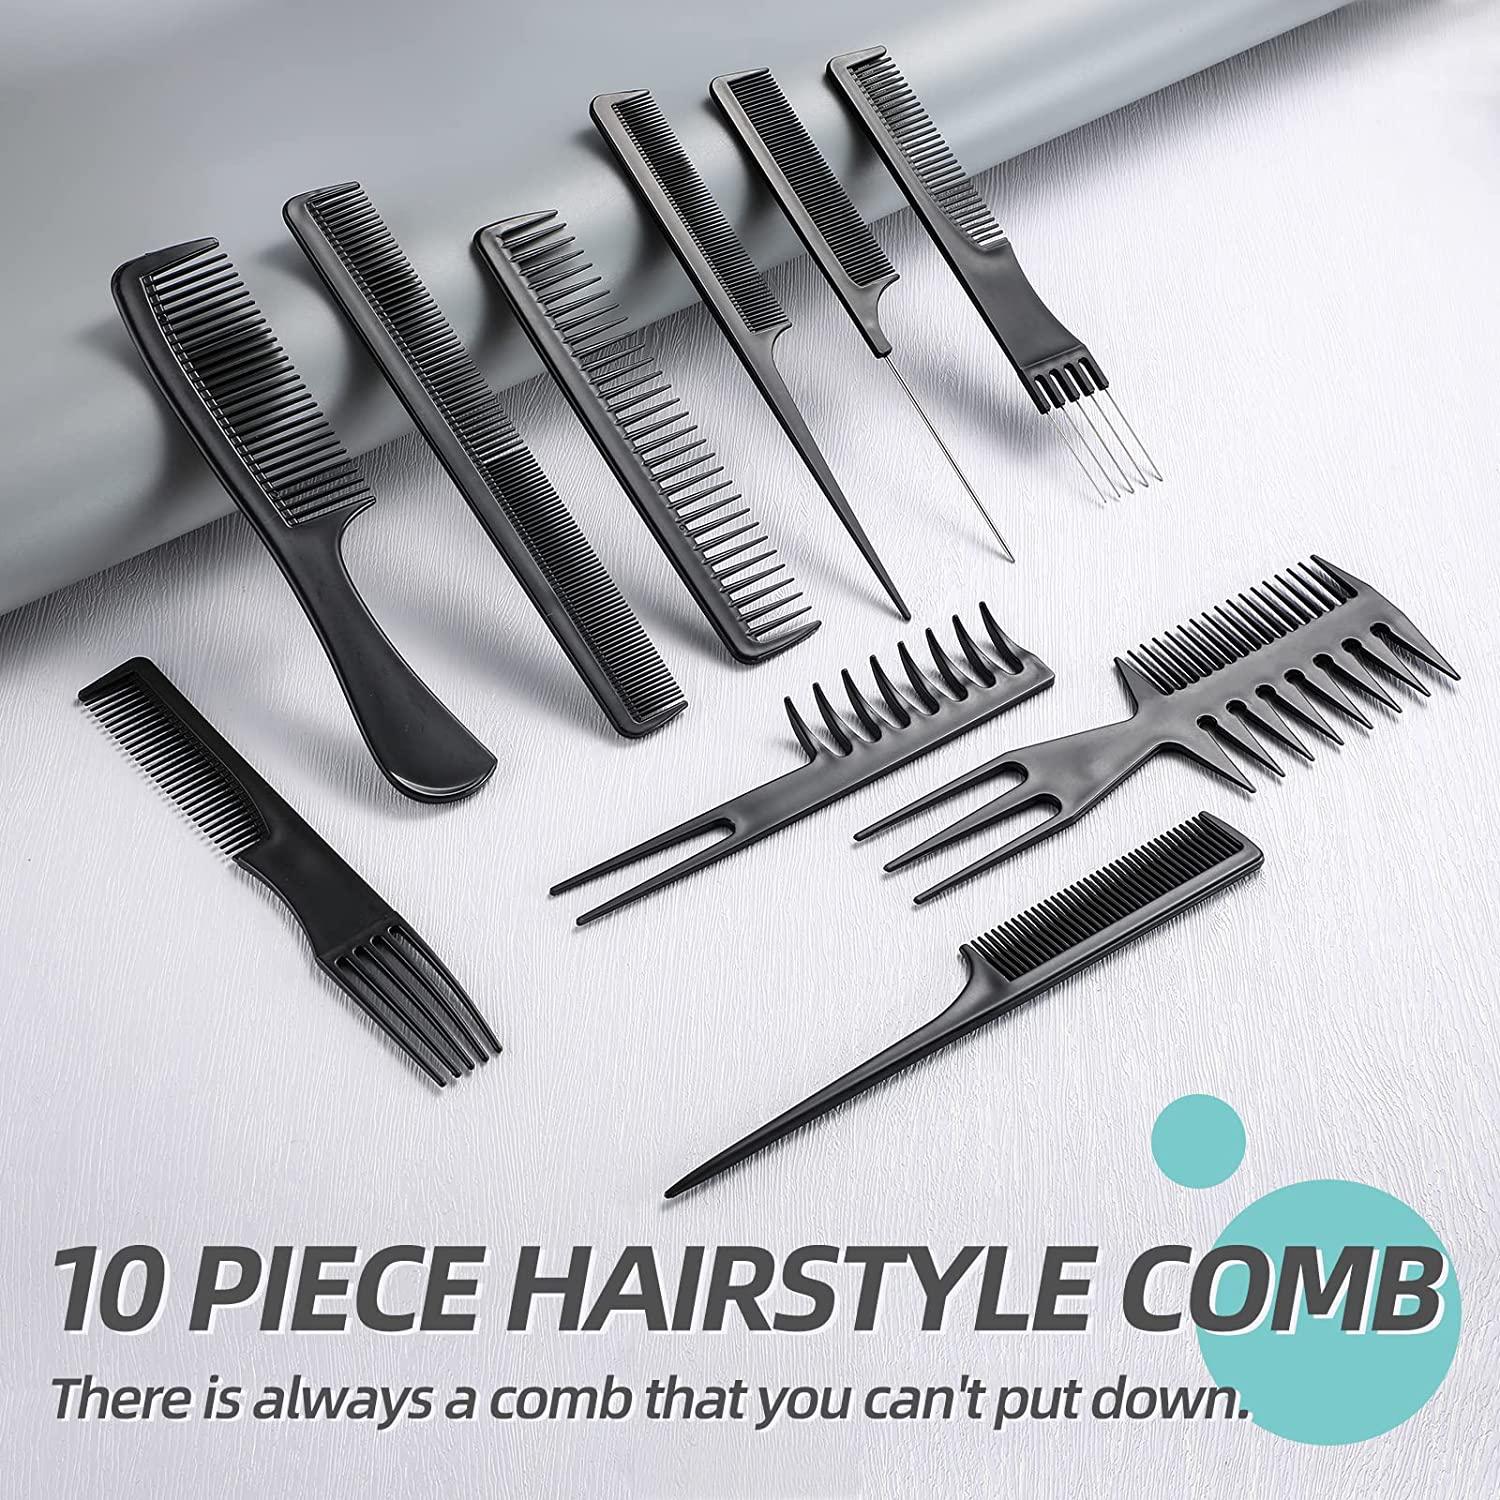 Oneleaf Styling Hair Comb 10PCS Hair Stylists Professional Styling Comb Set  Variety Pack Great for All Hair Types & Styles black